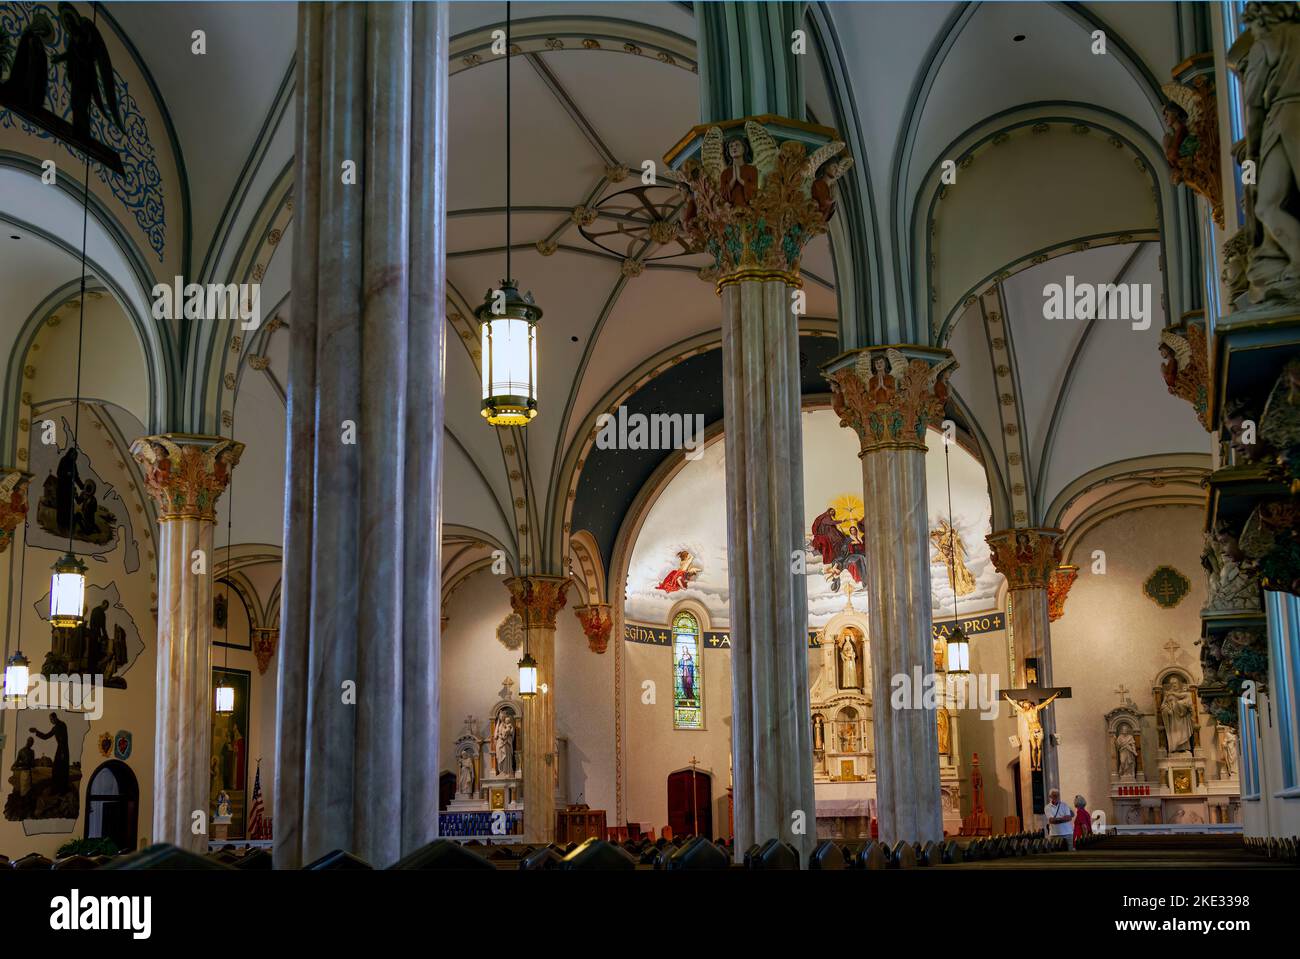 Interior view of Holy Angel's Catholic Church in Buffalo New York in 2013.  This church was decommissioned and sold in 2020. Stock Photo